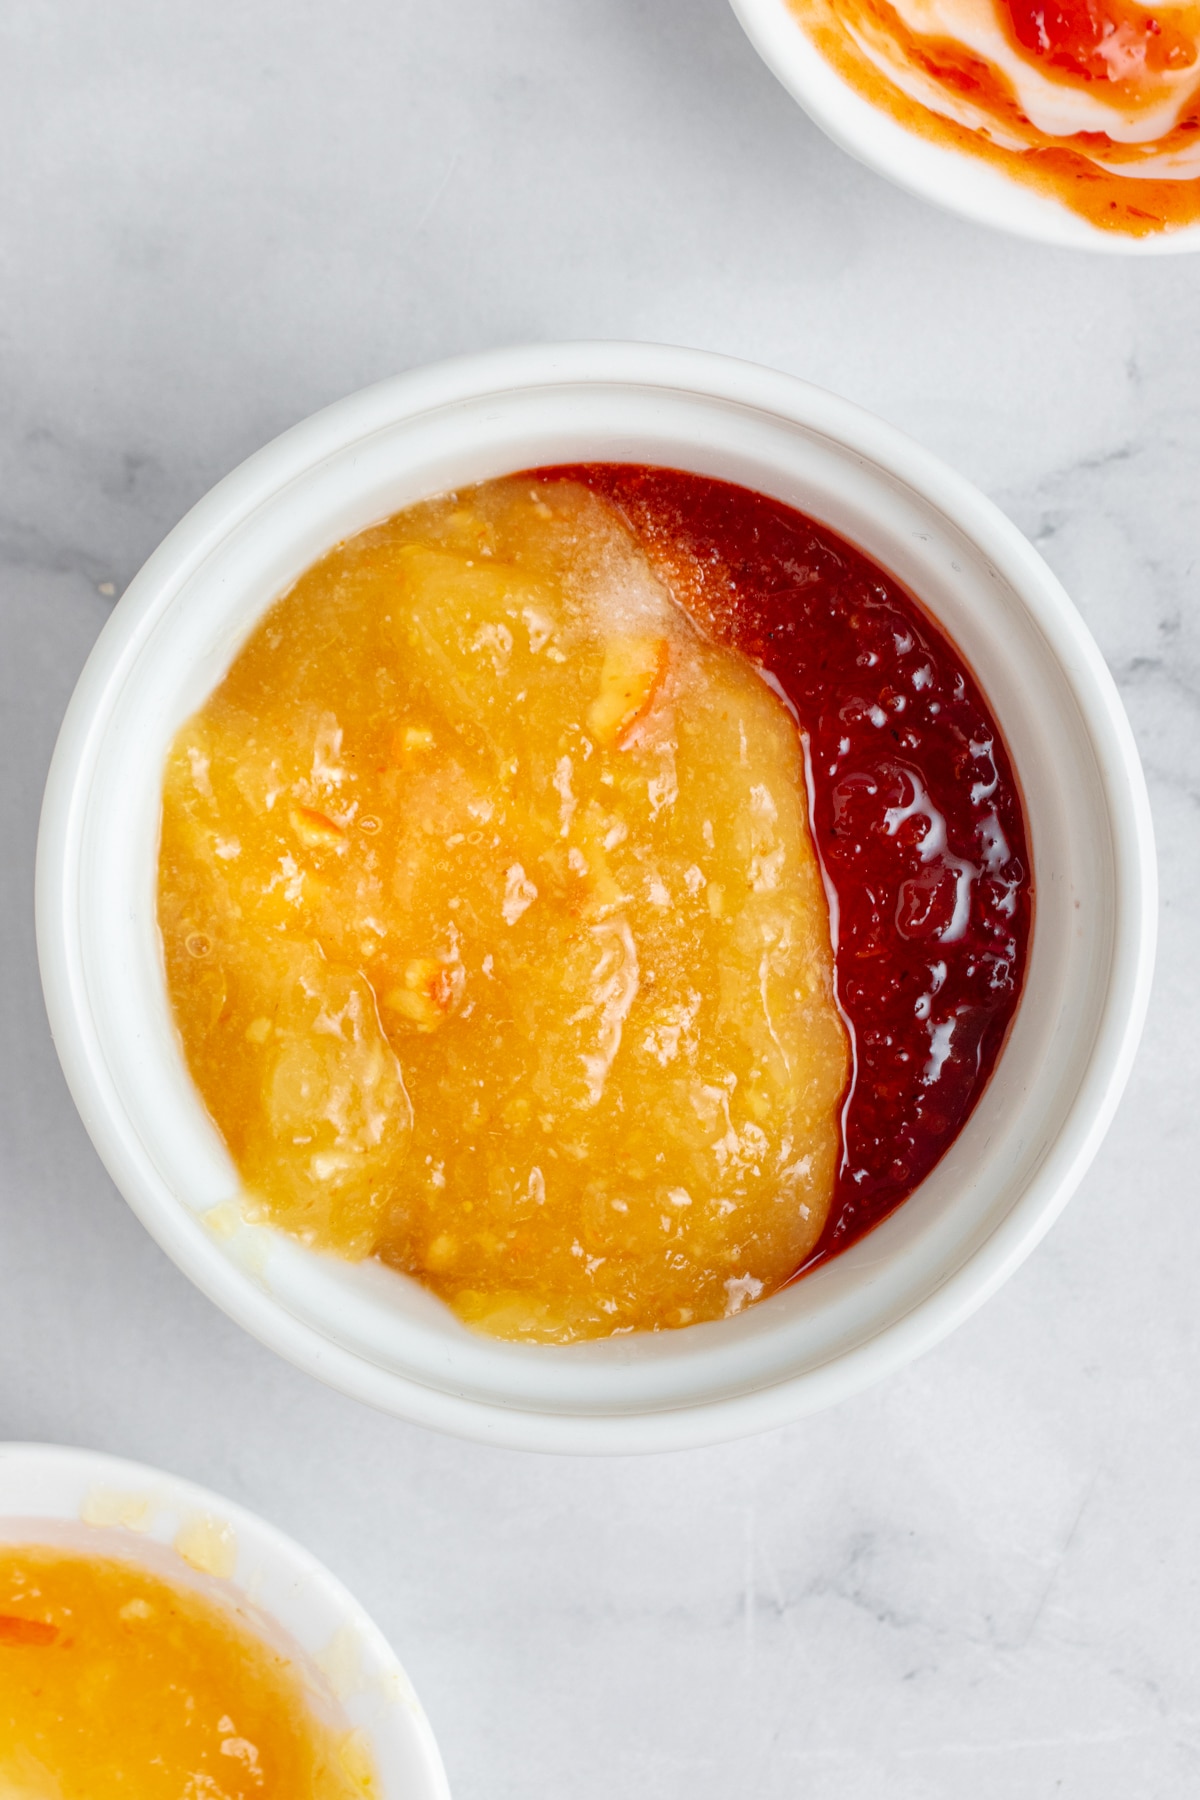 Sweet chili and apricot dipping sauce in a small bowl.